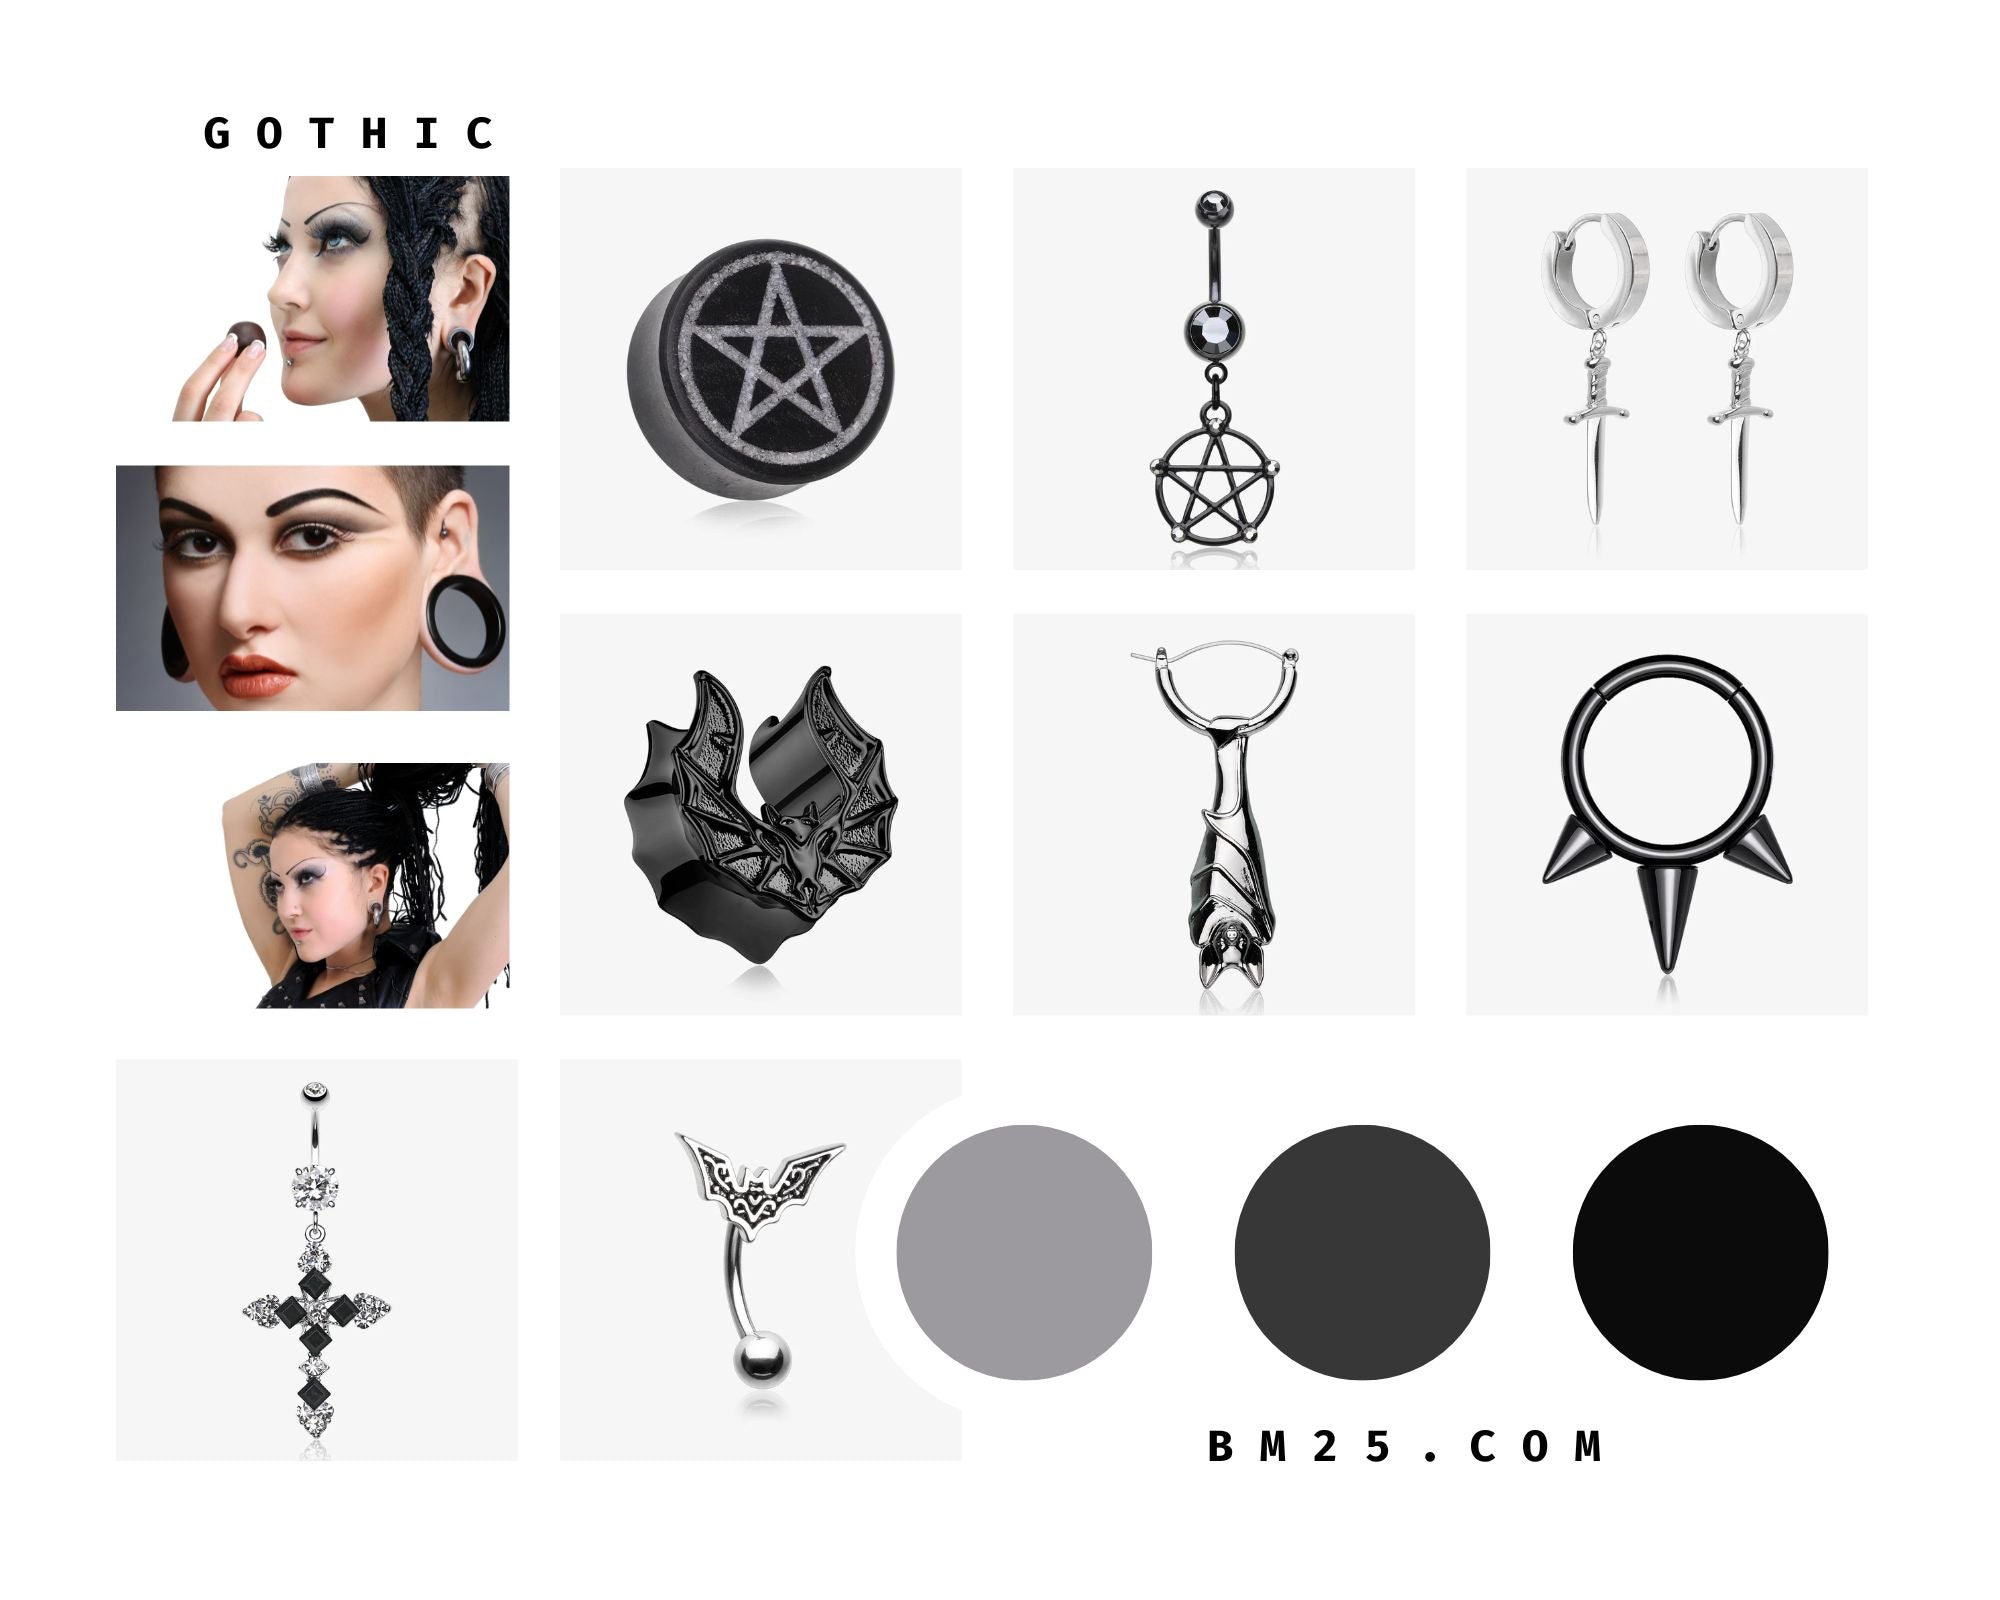 Gothic Styled Body Jewlery Style Guide from Bm25.com